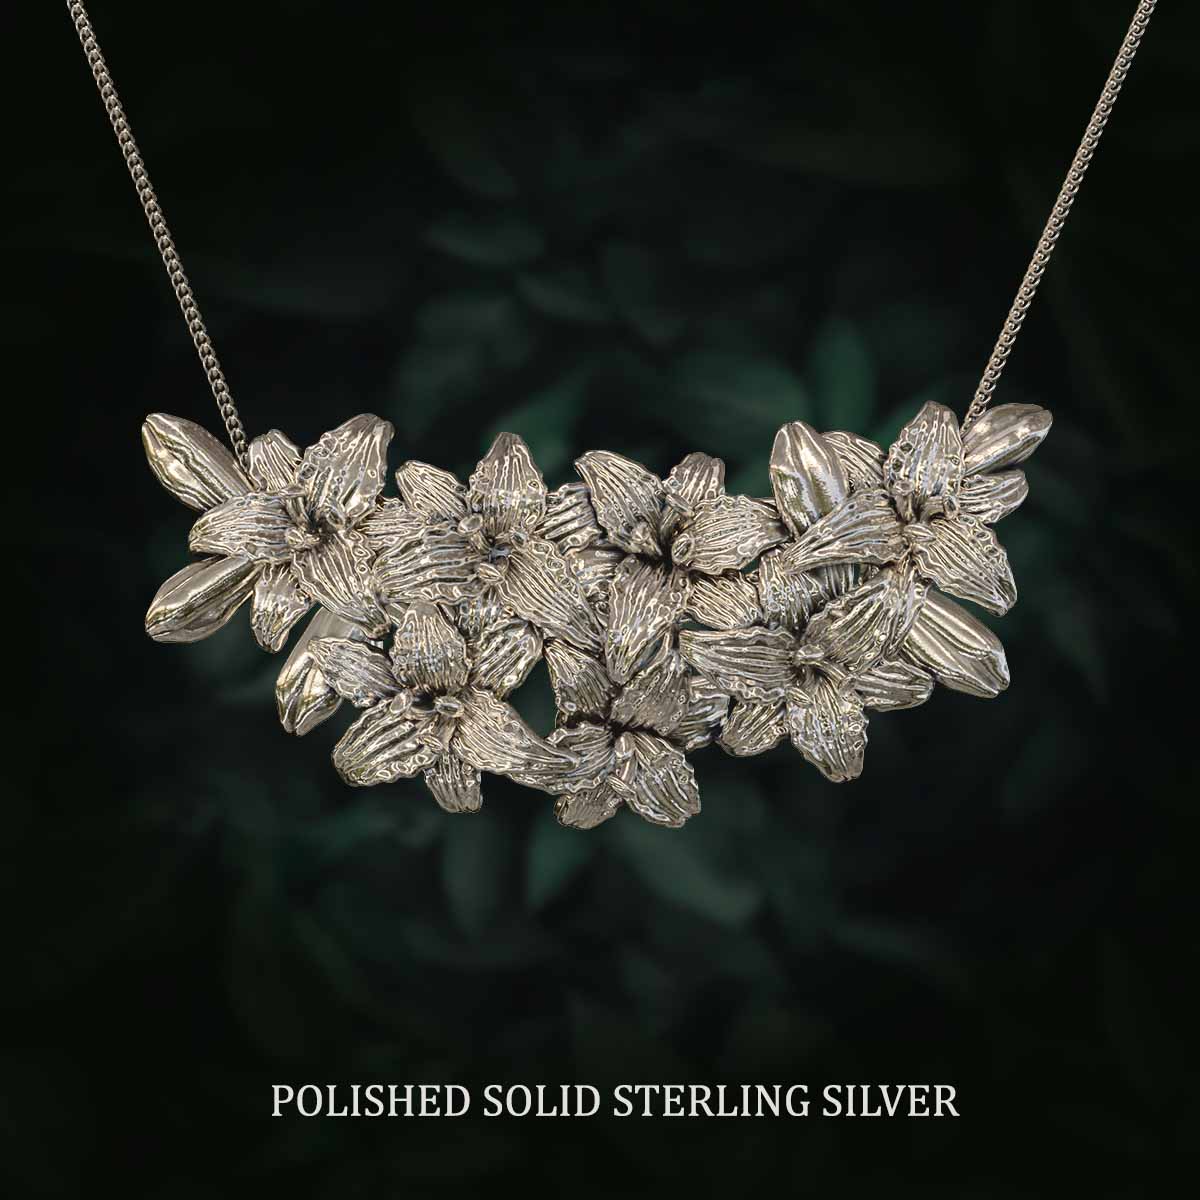 Polished-Solid-Sterling-Silver-Daylily-Flowers-Large-Pendant-Jewelry-For-Necklace